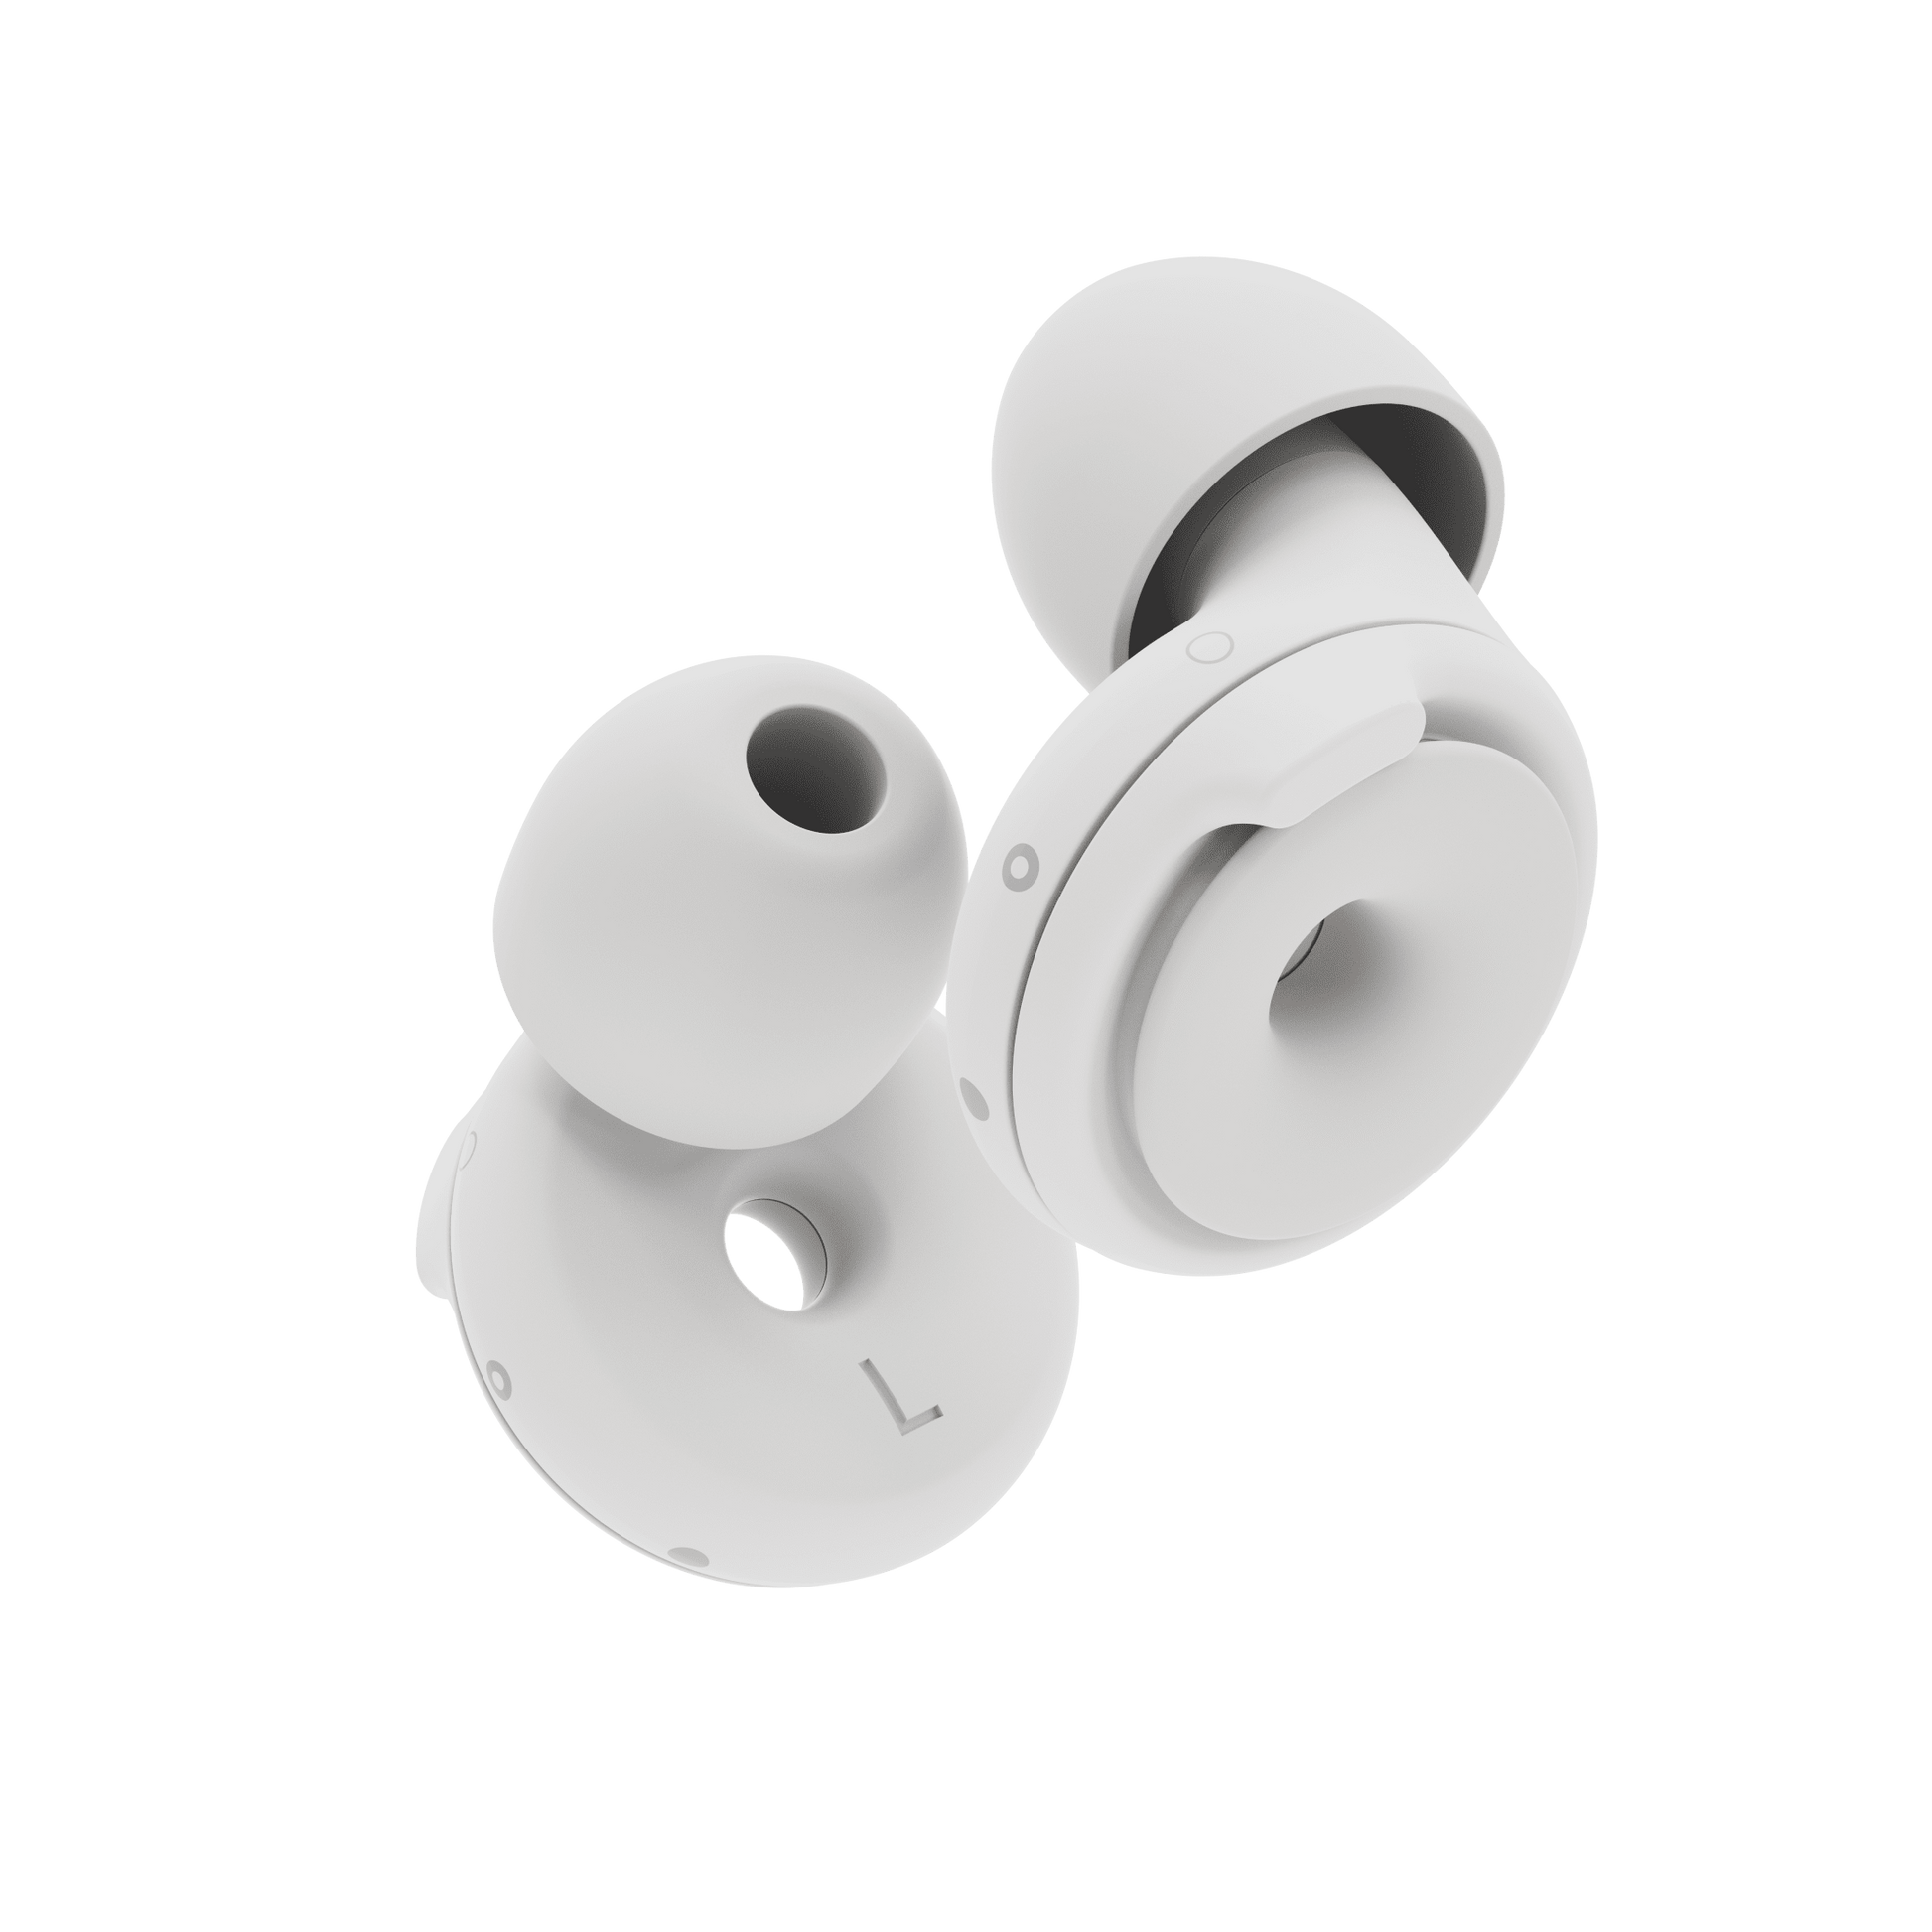 Flex Fit Earplugs with Noise Reduction Technology